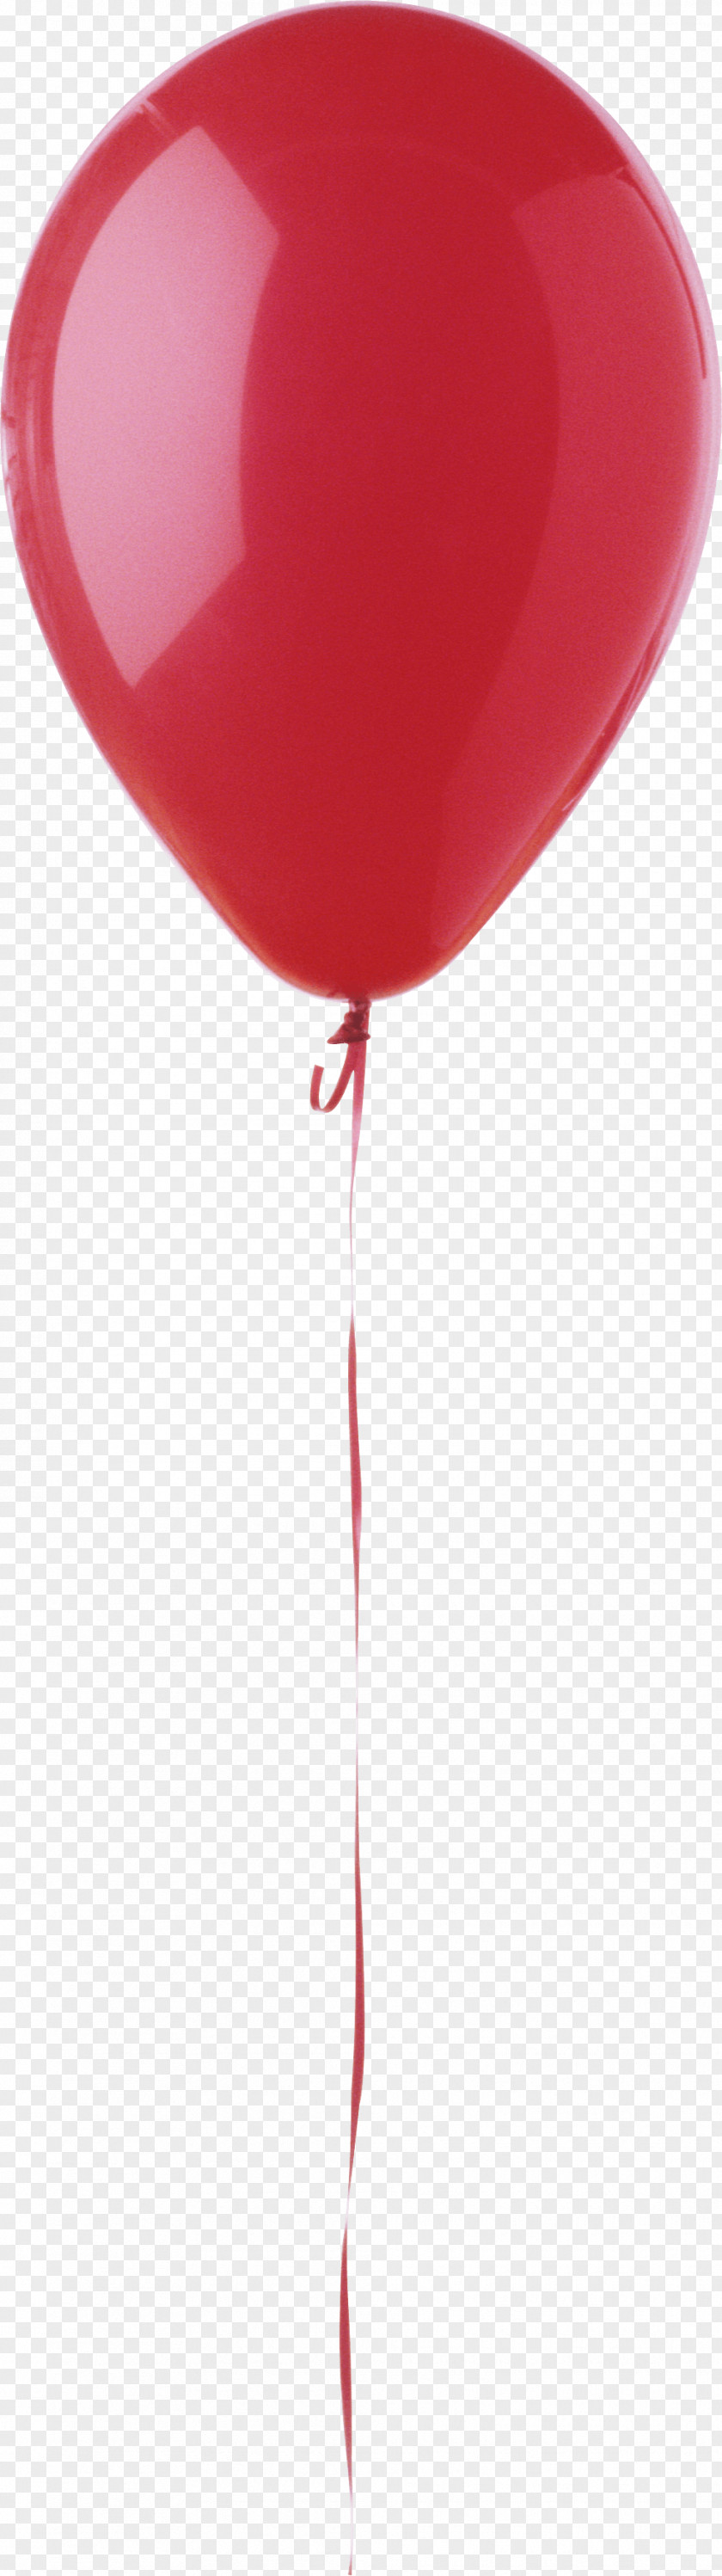 Balloons Image Toy Balloon PNG